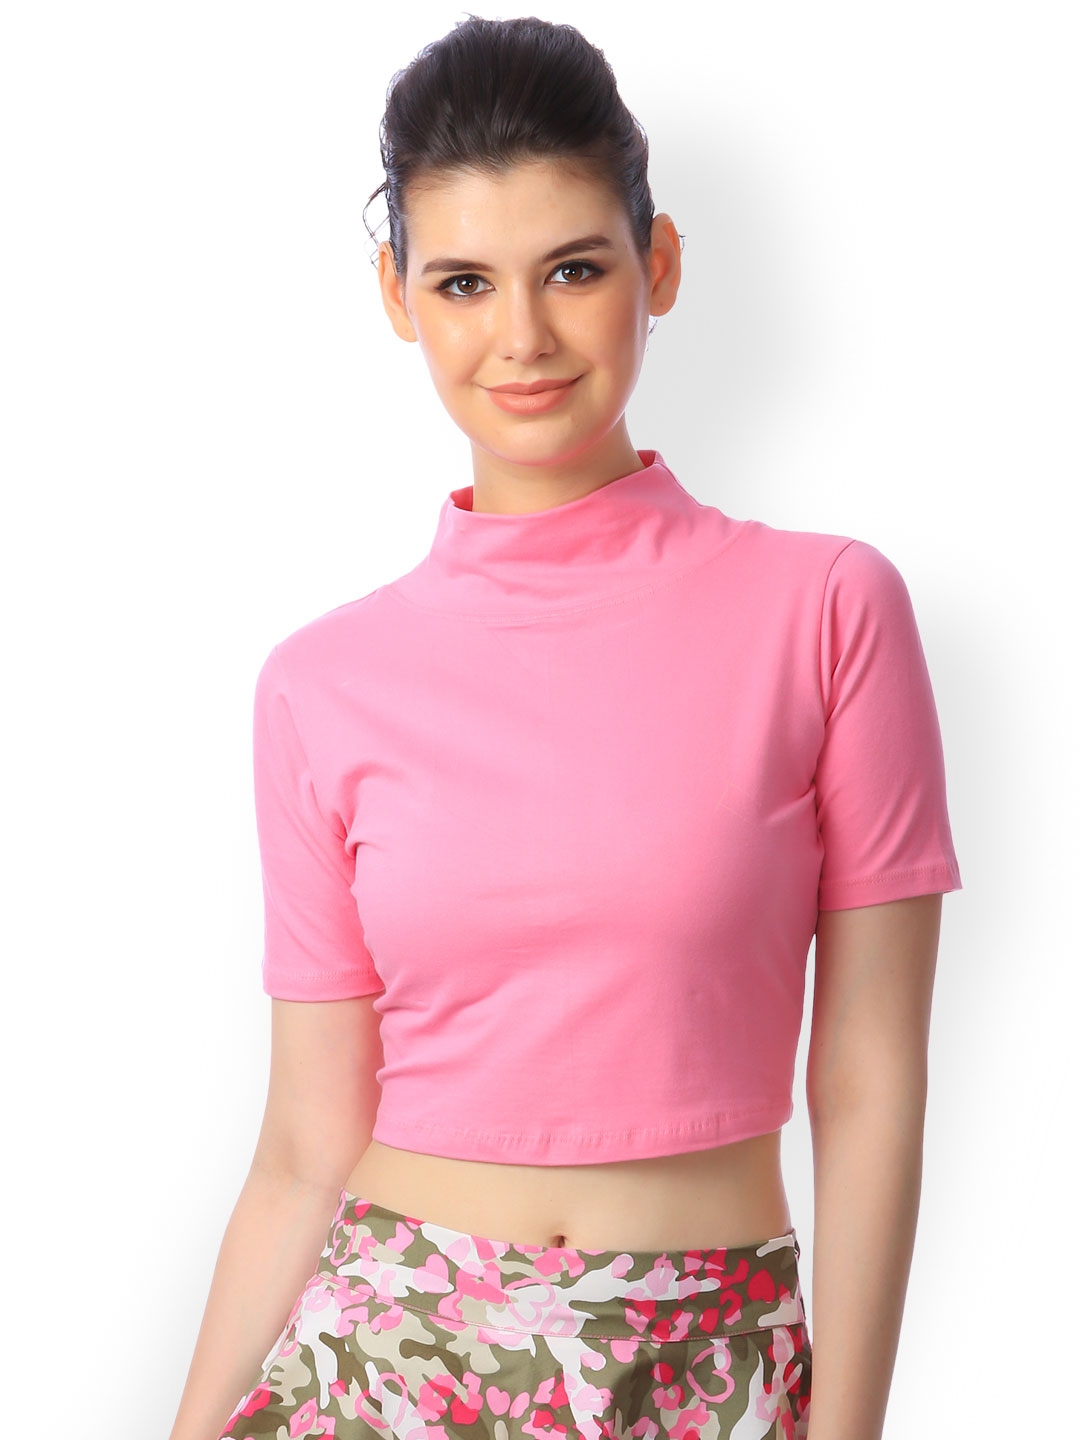 propeller evaporation unclear Buy Cation Pink Crop Top - Tops for Women 1668810 | Myntra